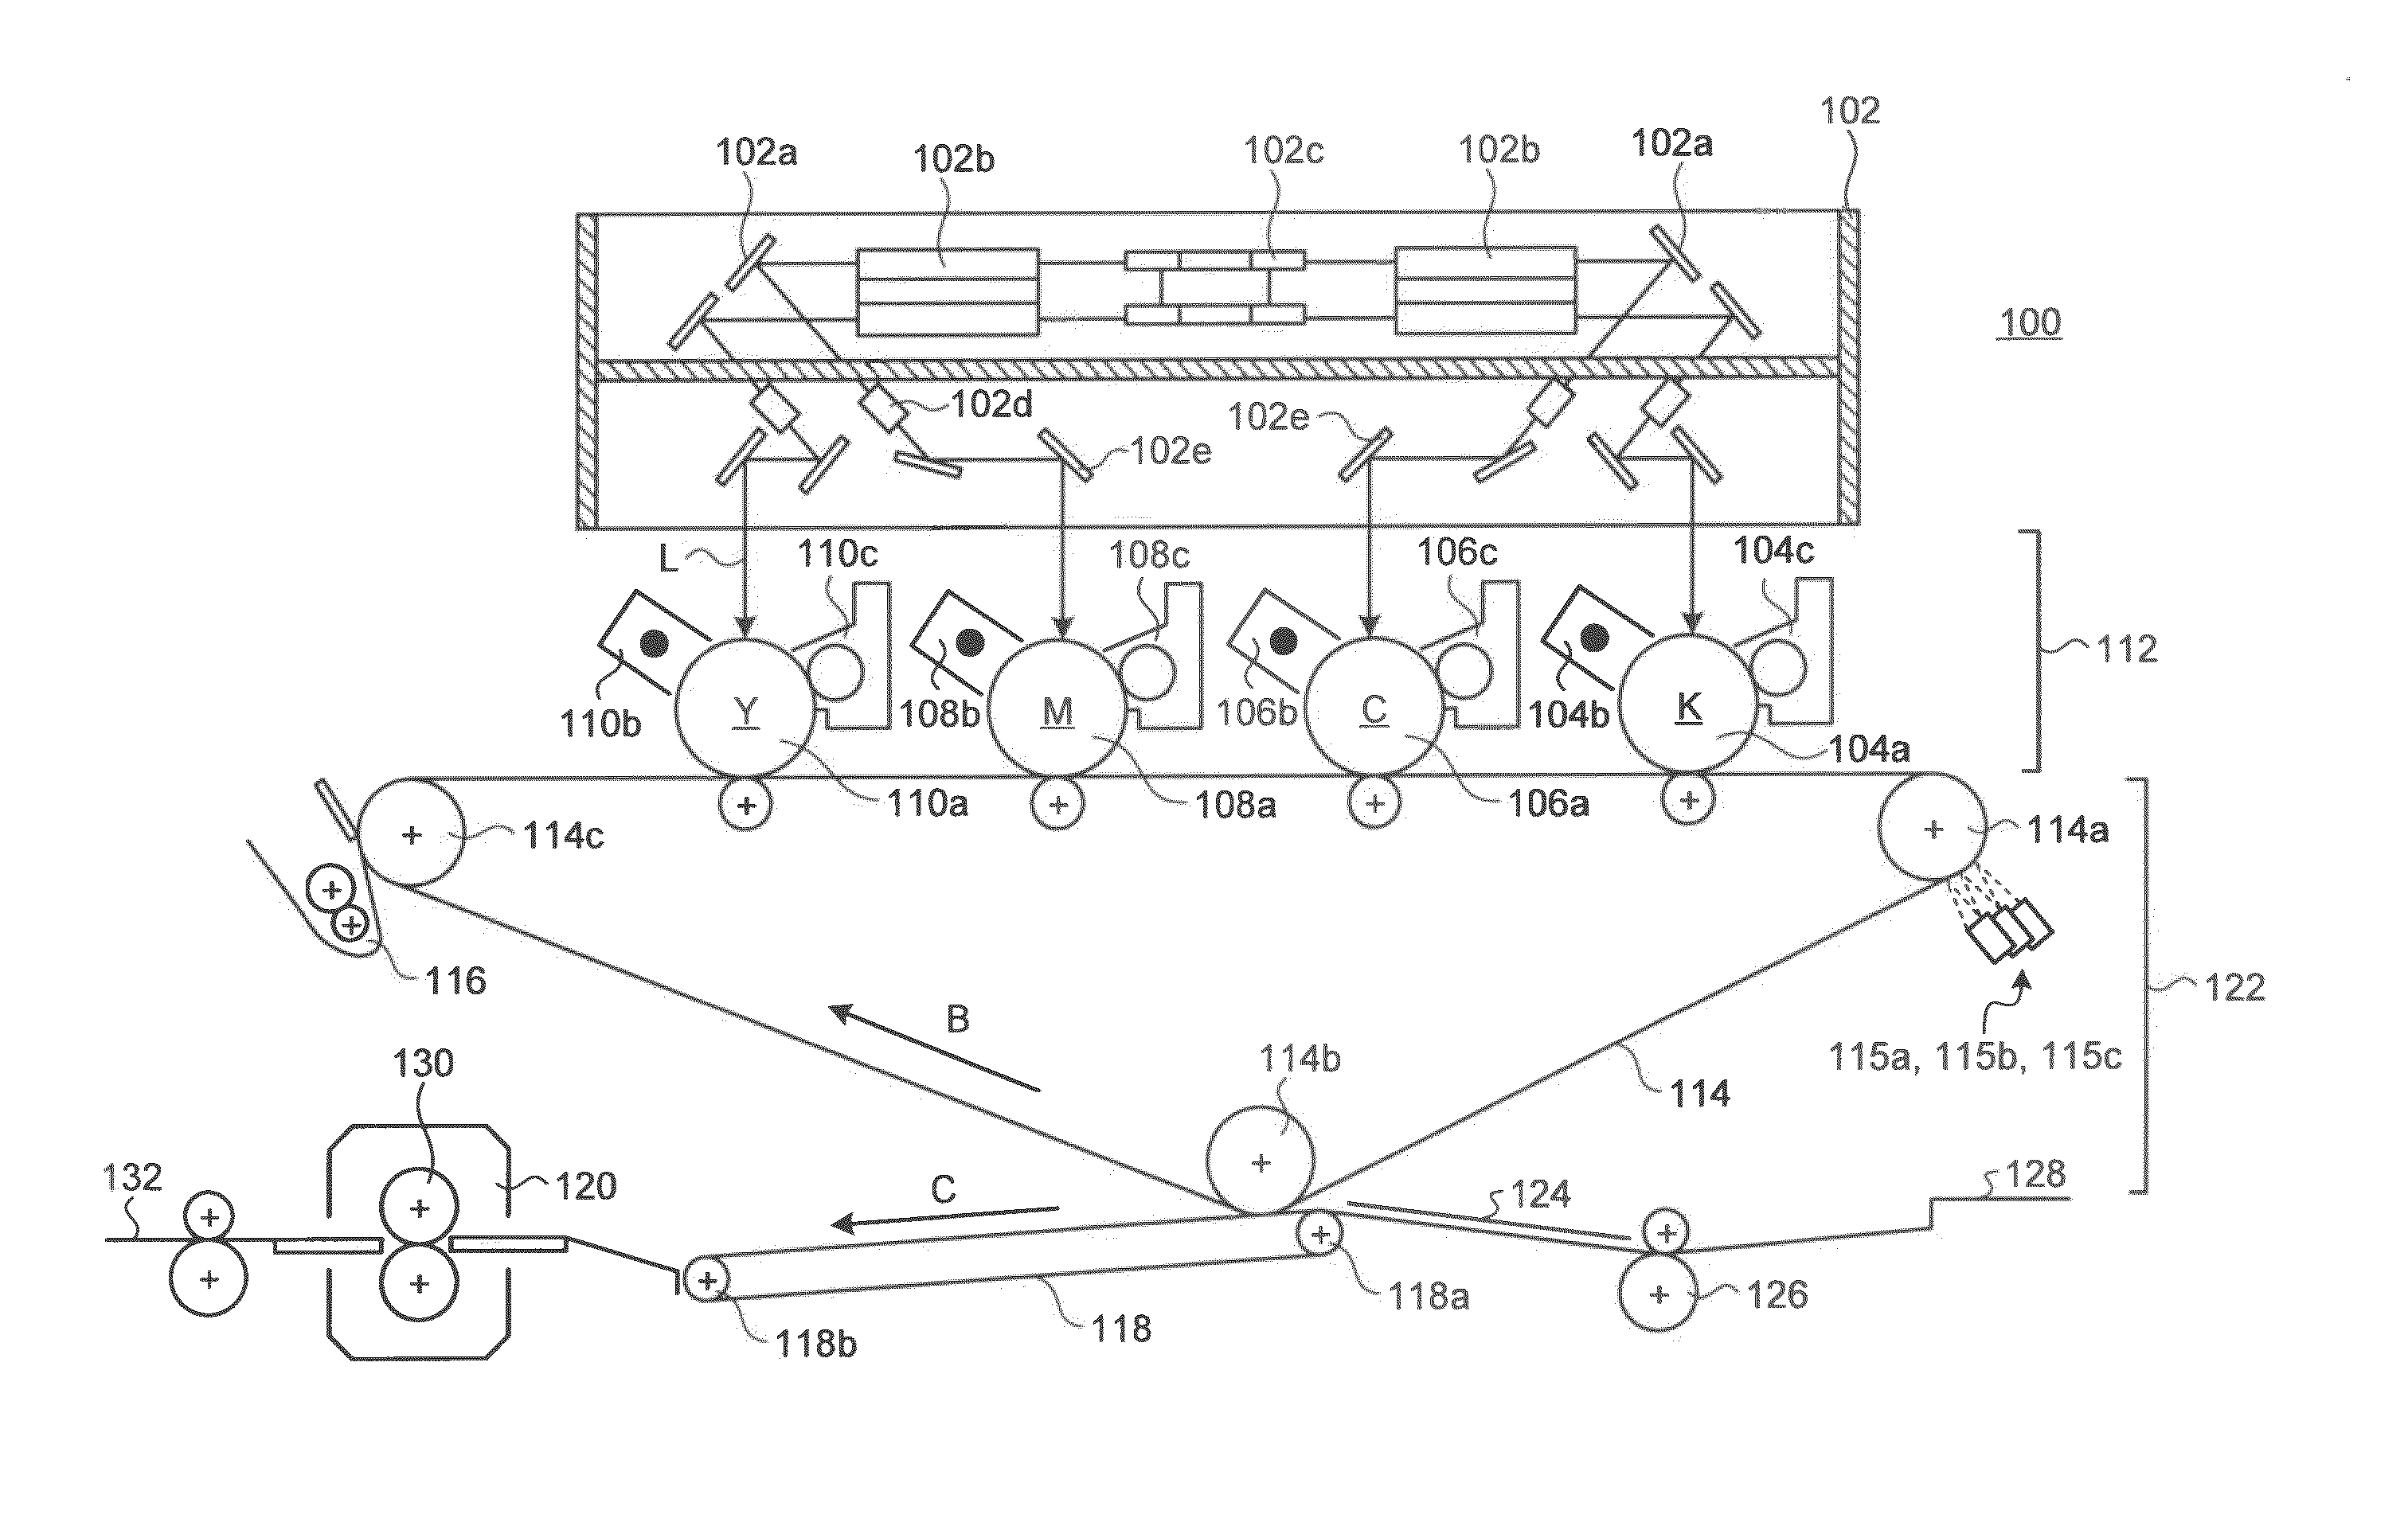 Image forming apparatus and method of controlling image forming apparatus